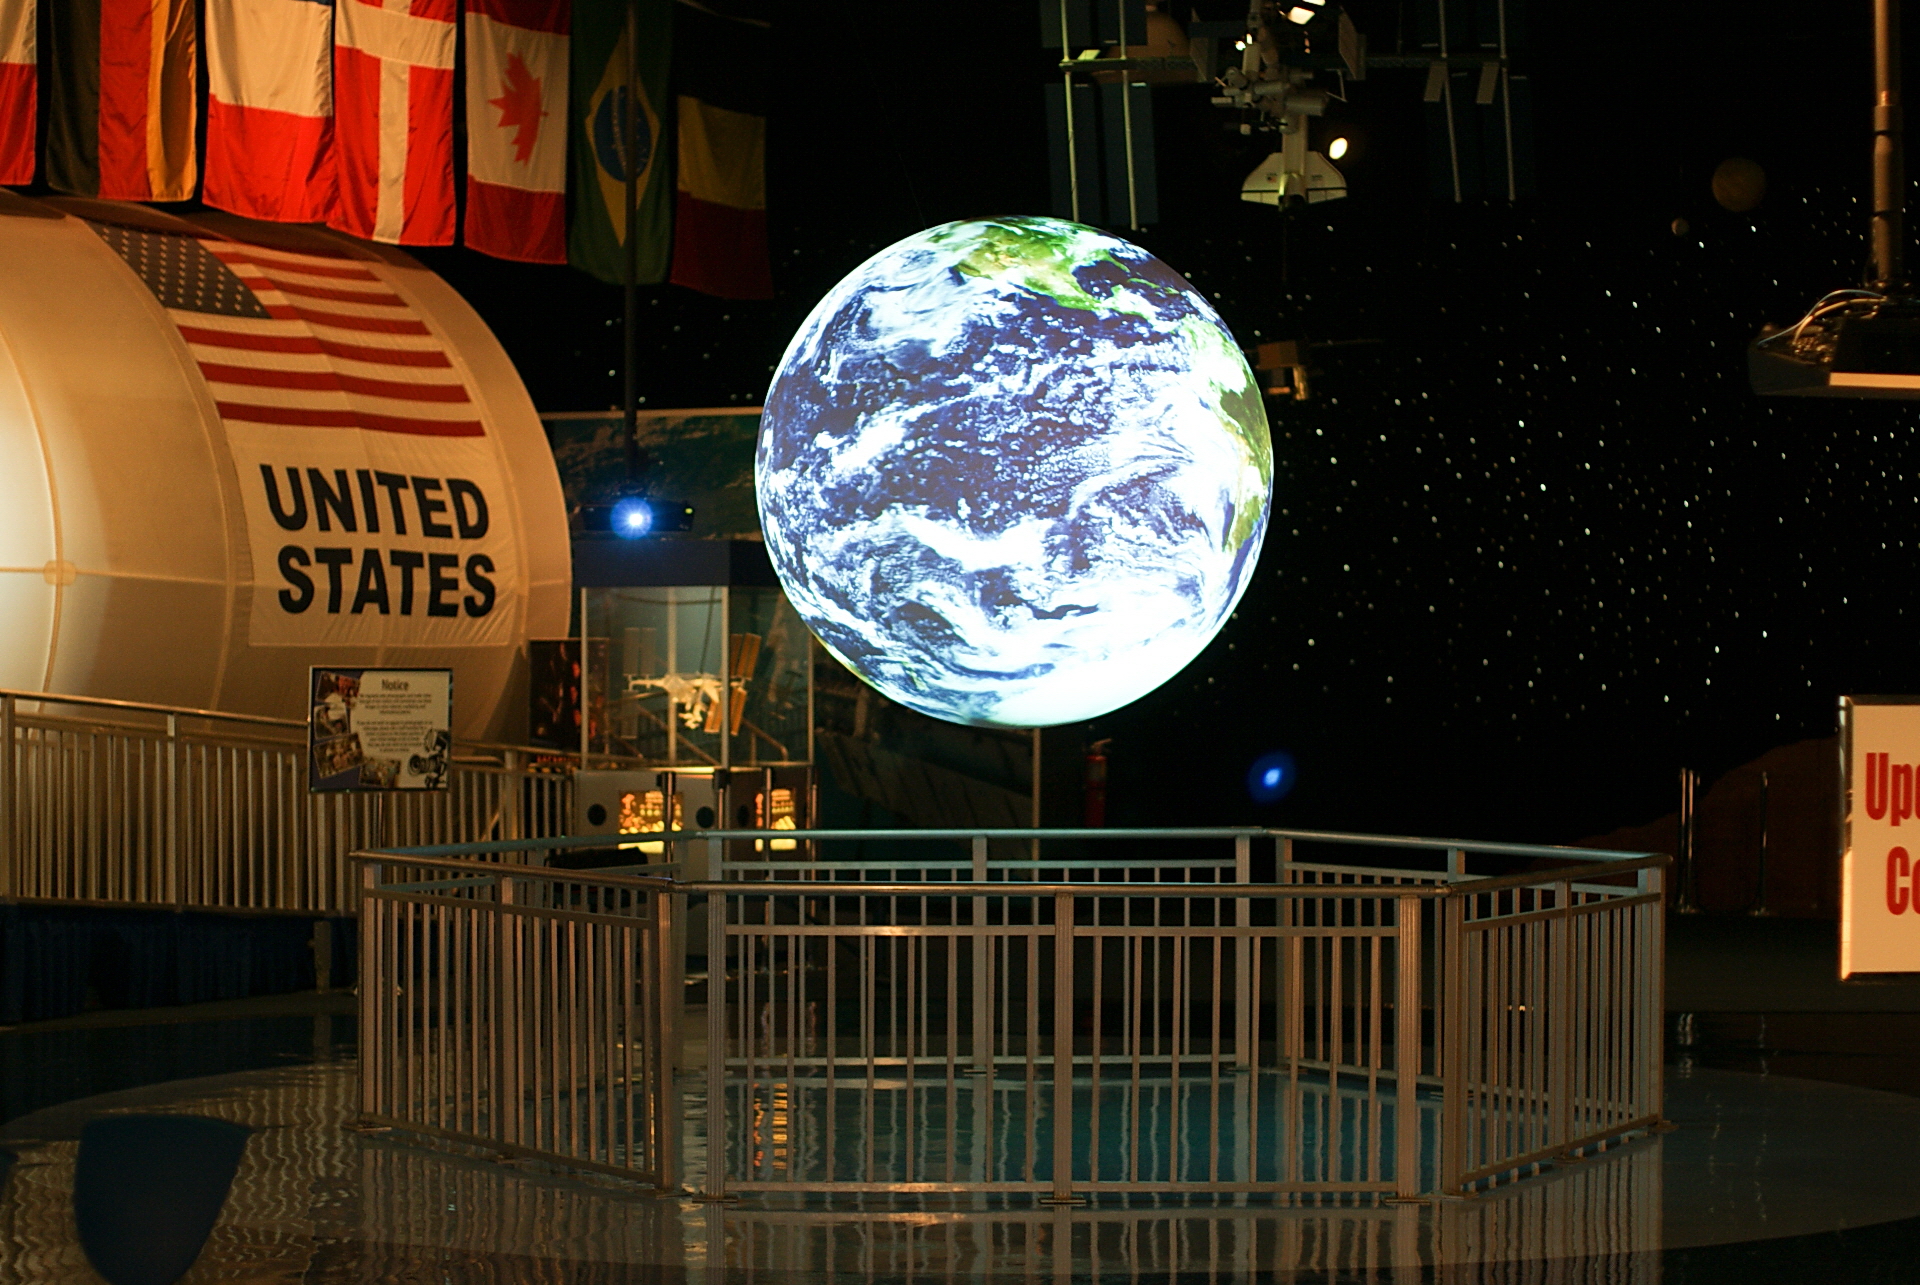 Science On a Sphere hangs in an empty exhibit space. Other exhibits related to space exploration are visible int he background